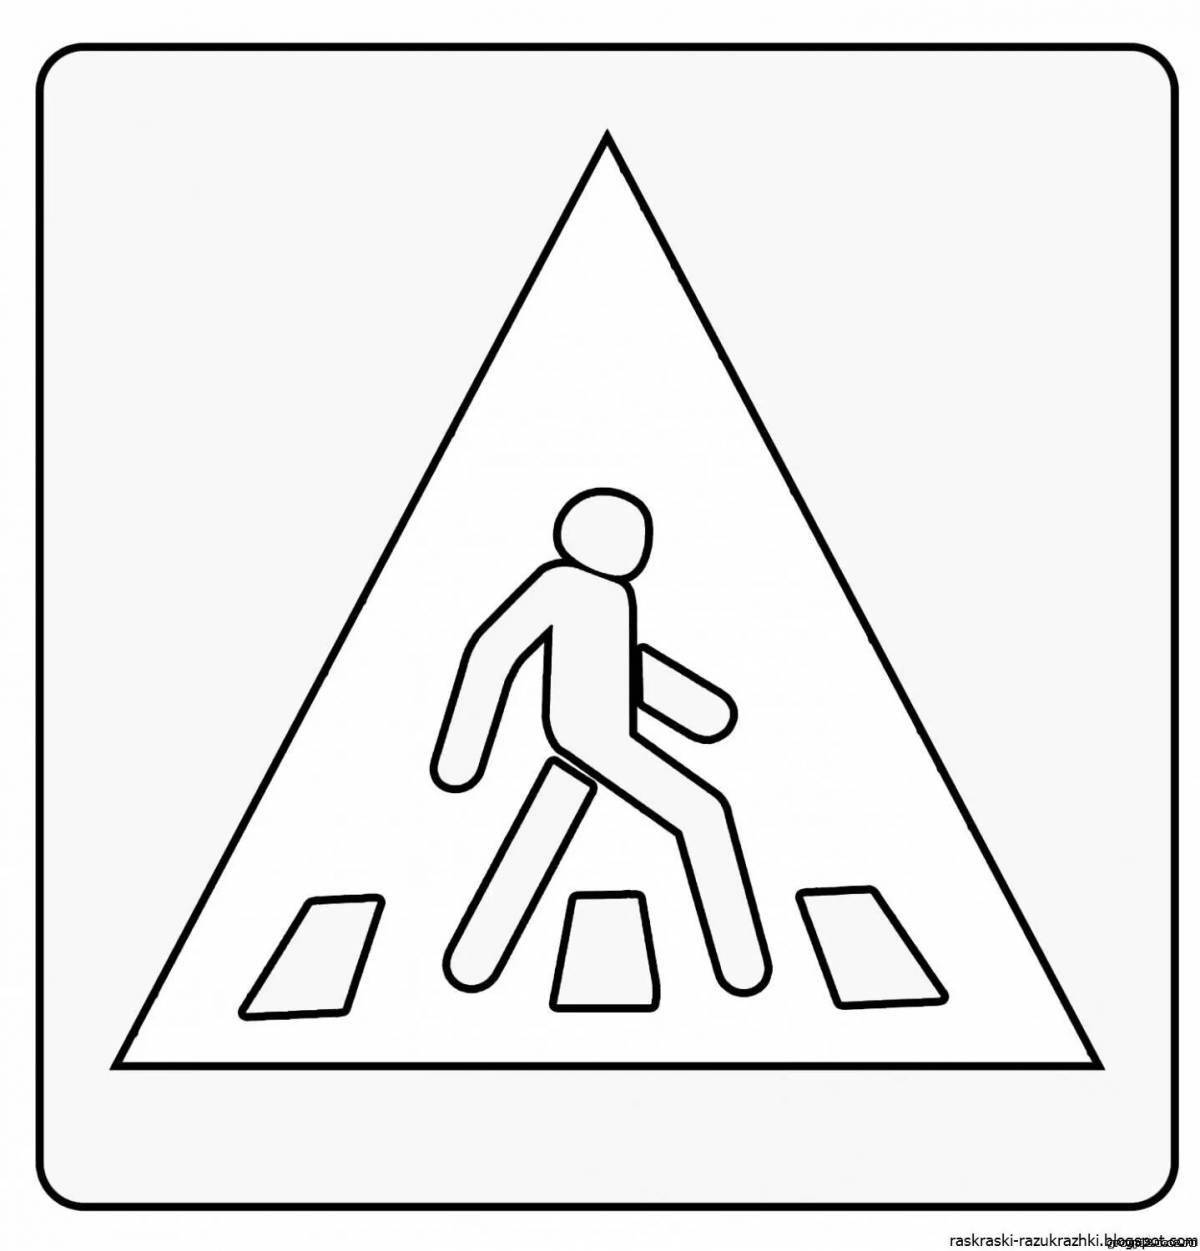 Signs for pedestrians #2